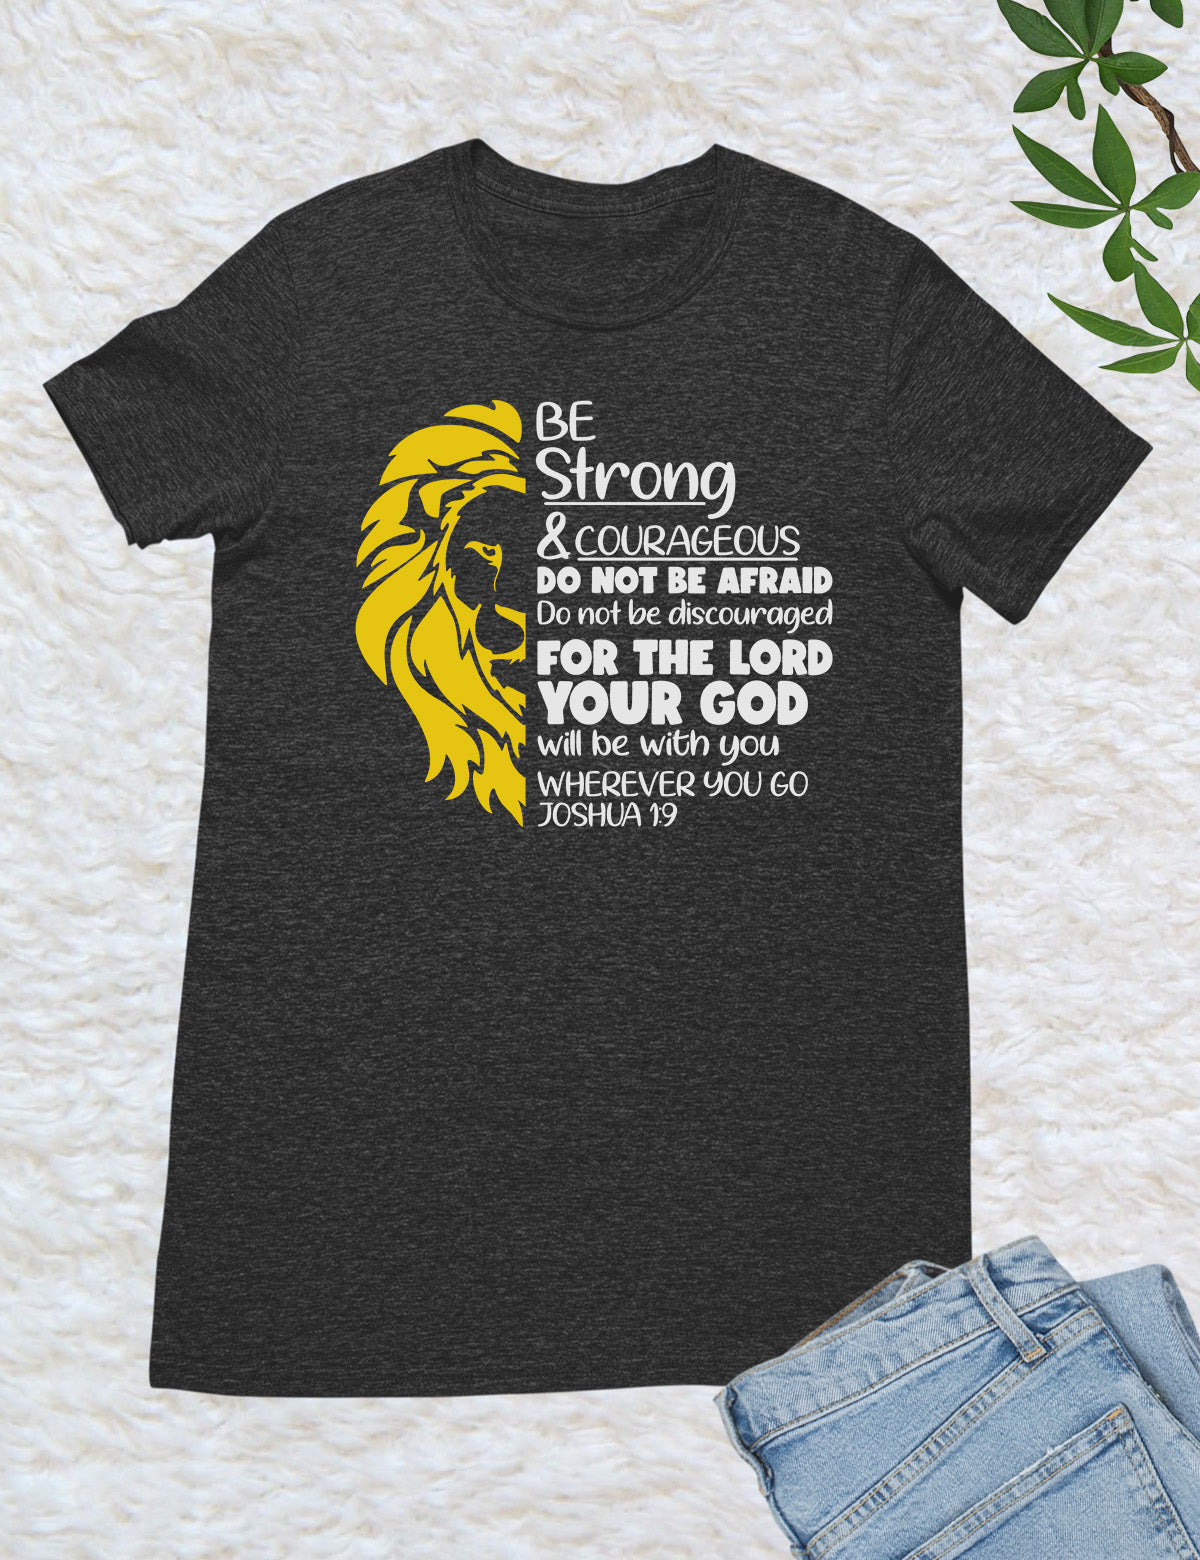 Be Strong and Courageous Fearless Shirts